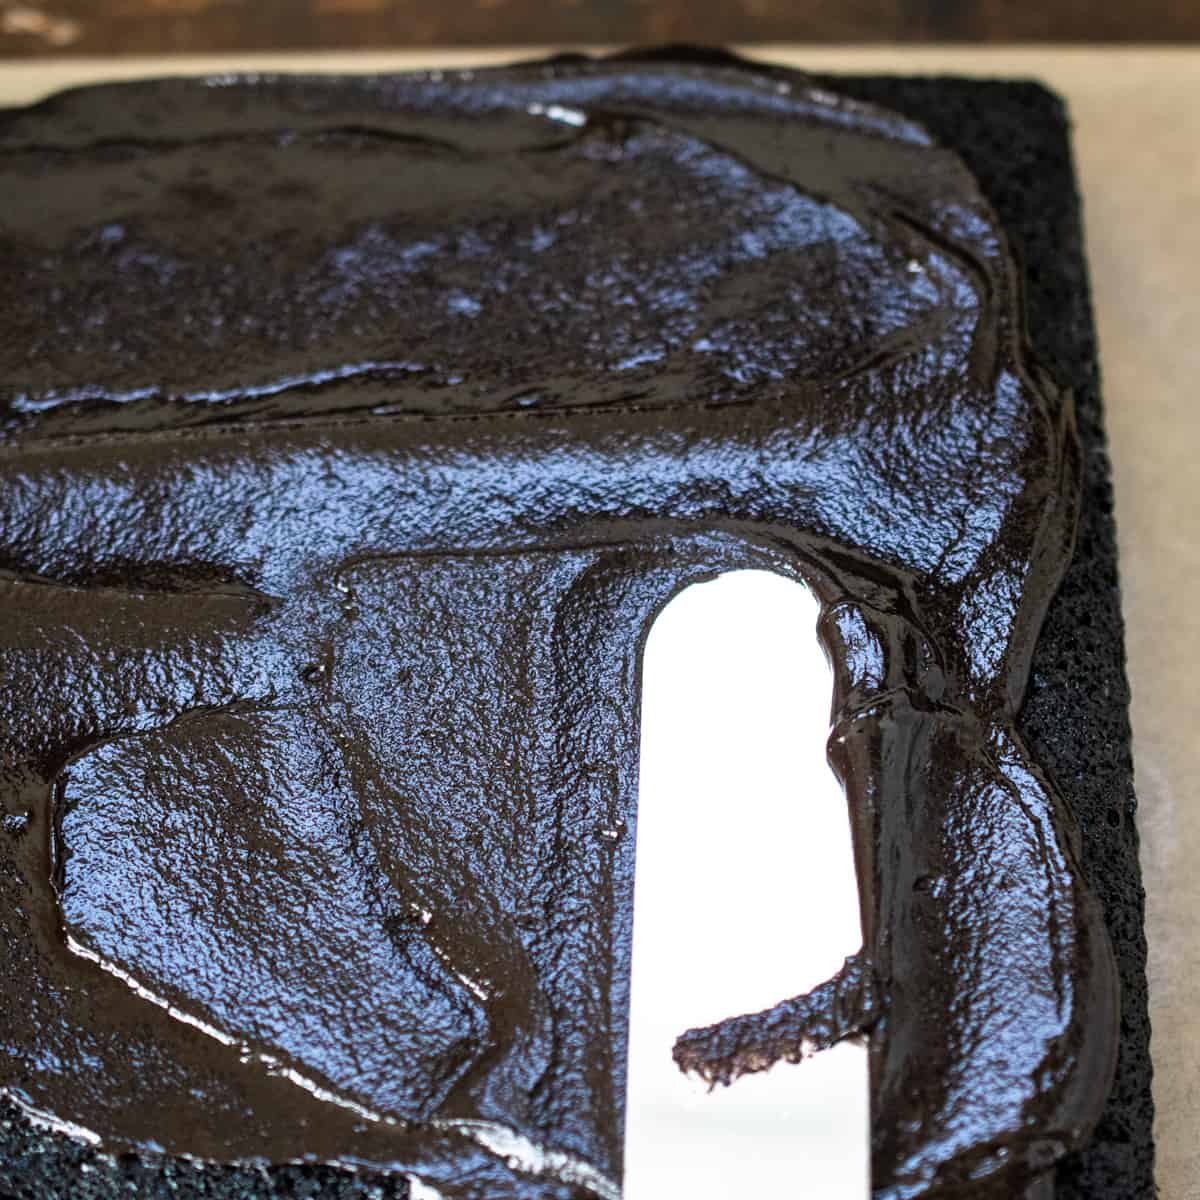 Chocolate ganache icing being spread over a cake with an offset spatula.